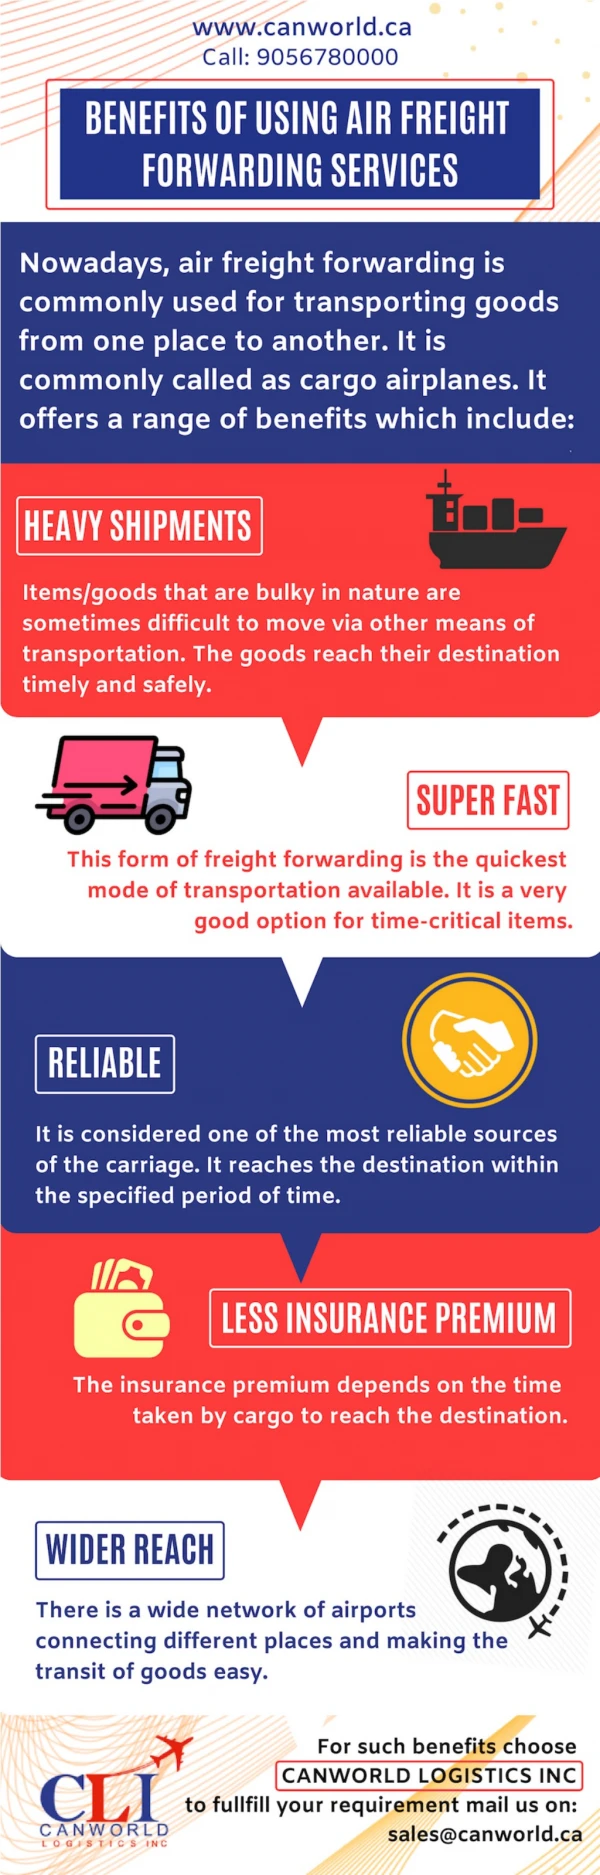 Benefits of Using Air Freight Forwarding Services